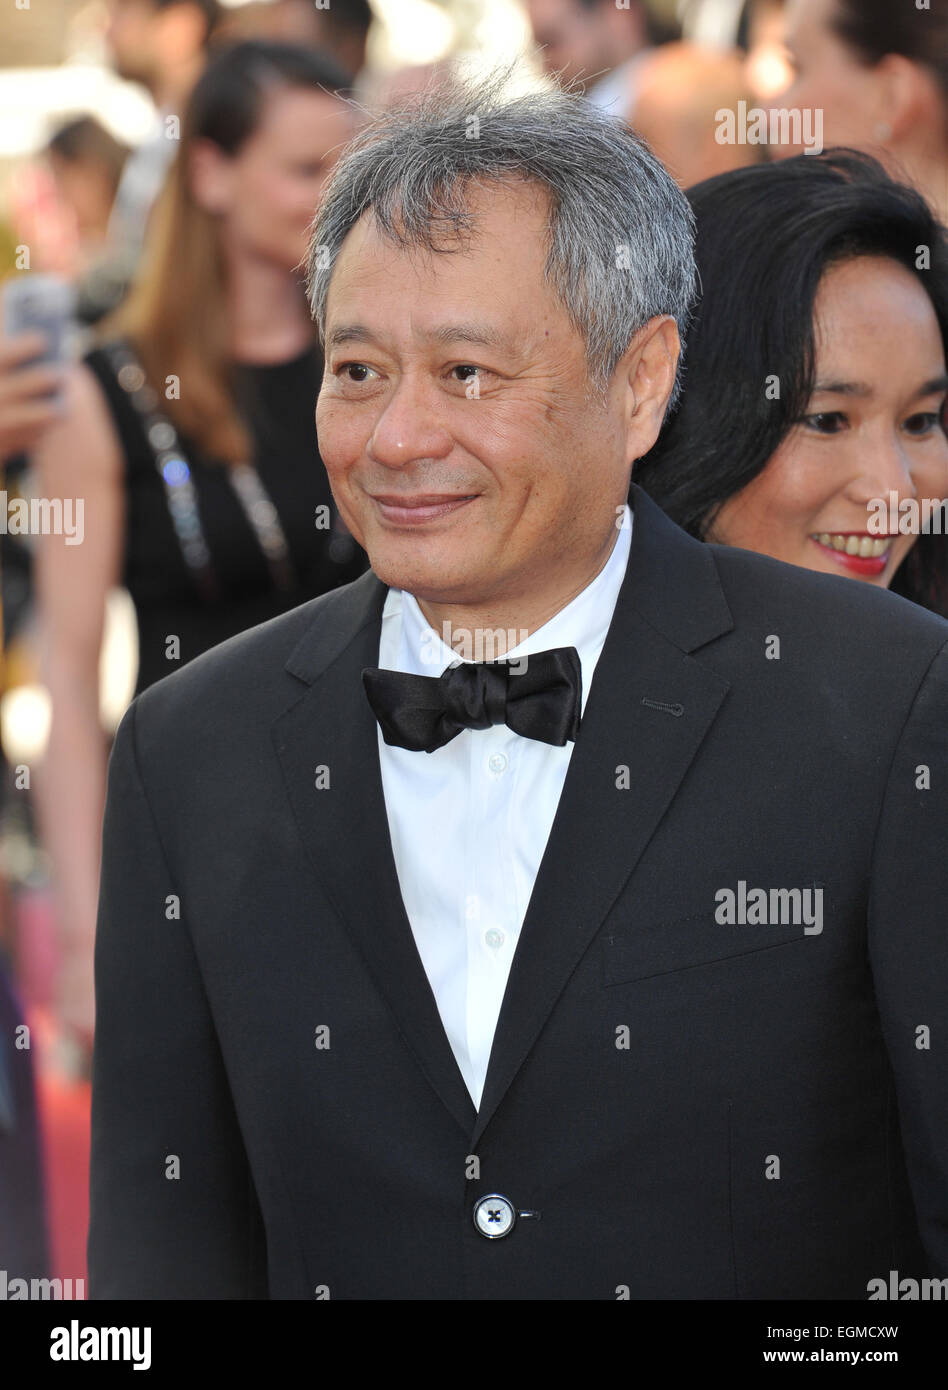 CANNES, FRANCE - MAY 17, 2013: Ang Lee at the gala premiere of 'The Past' (Le PassŽ) in competition at the 66th Festival de Cannes. Stock Photo